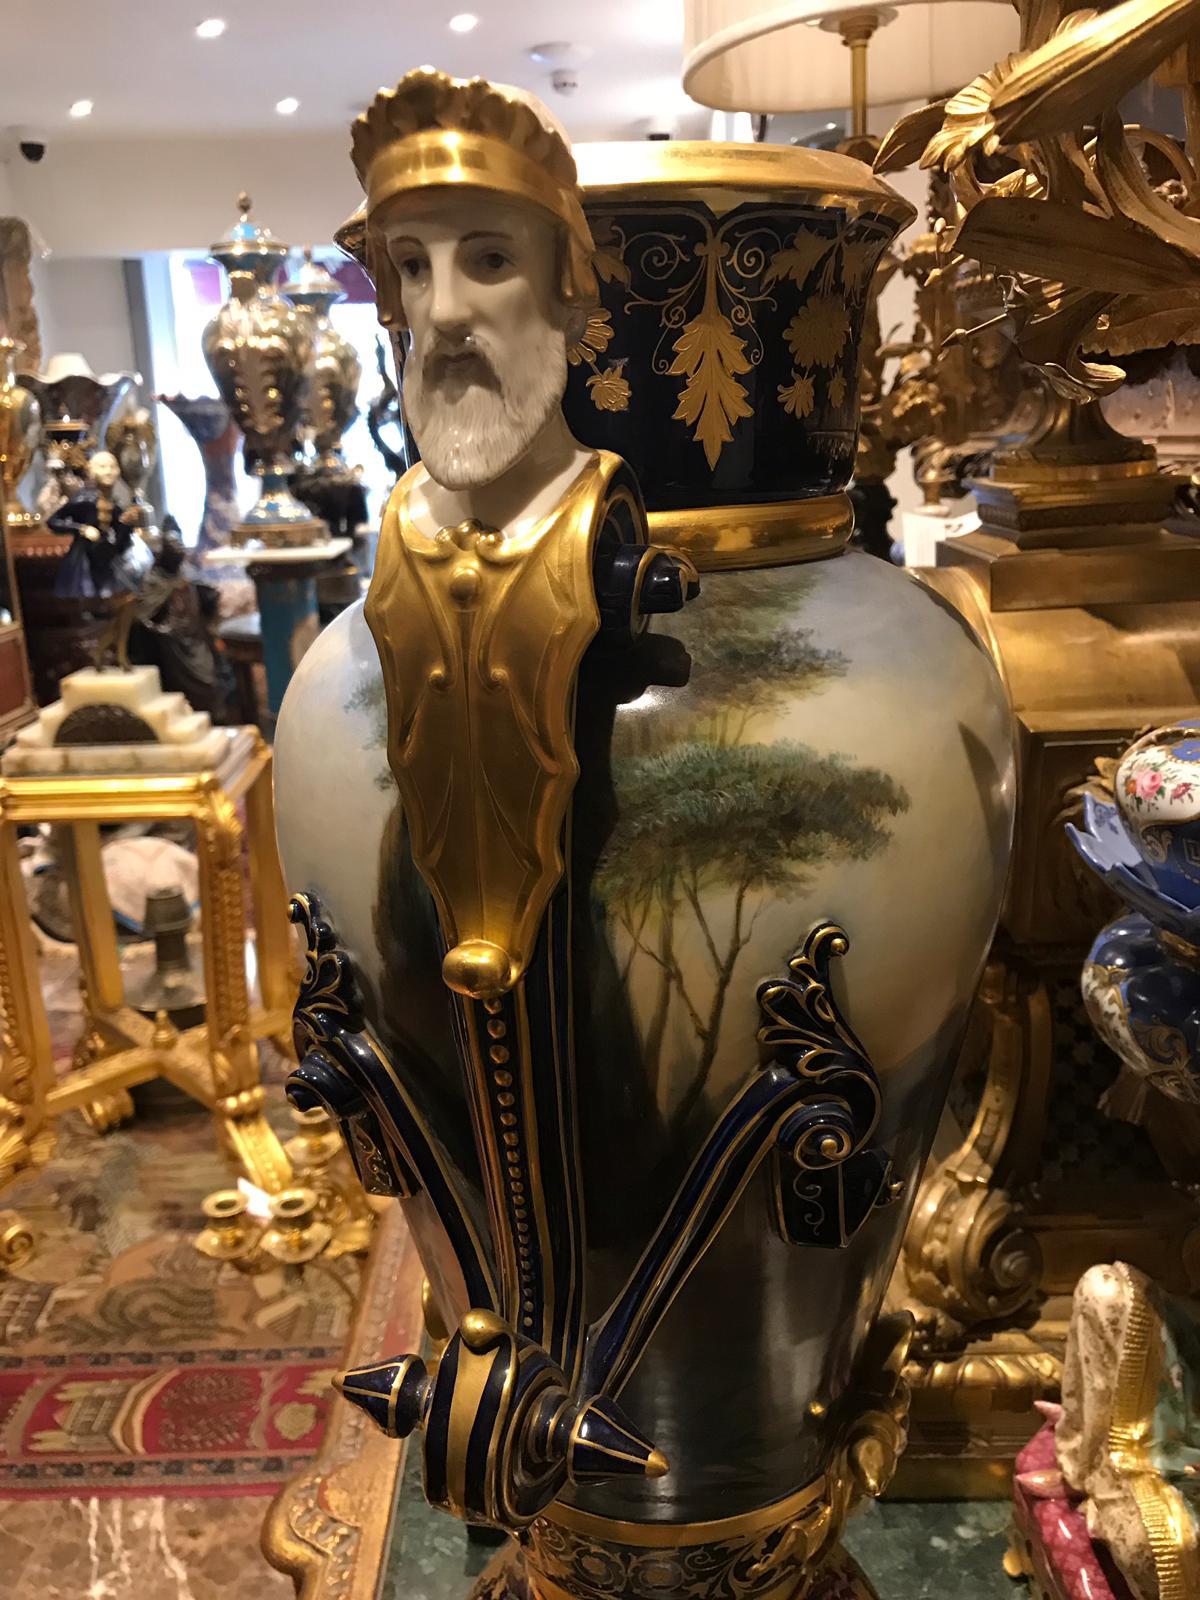 Of a baluster form, the pair feature scroll handles topped by a neoclassical crowned male's bust (mythological bust) and another face around the base portion above the foot. The dark blue vases are painted with Neapolitan peasant girls against